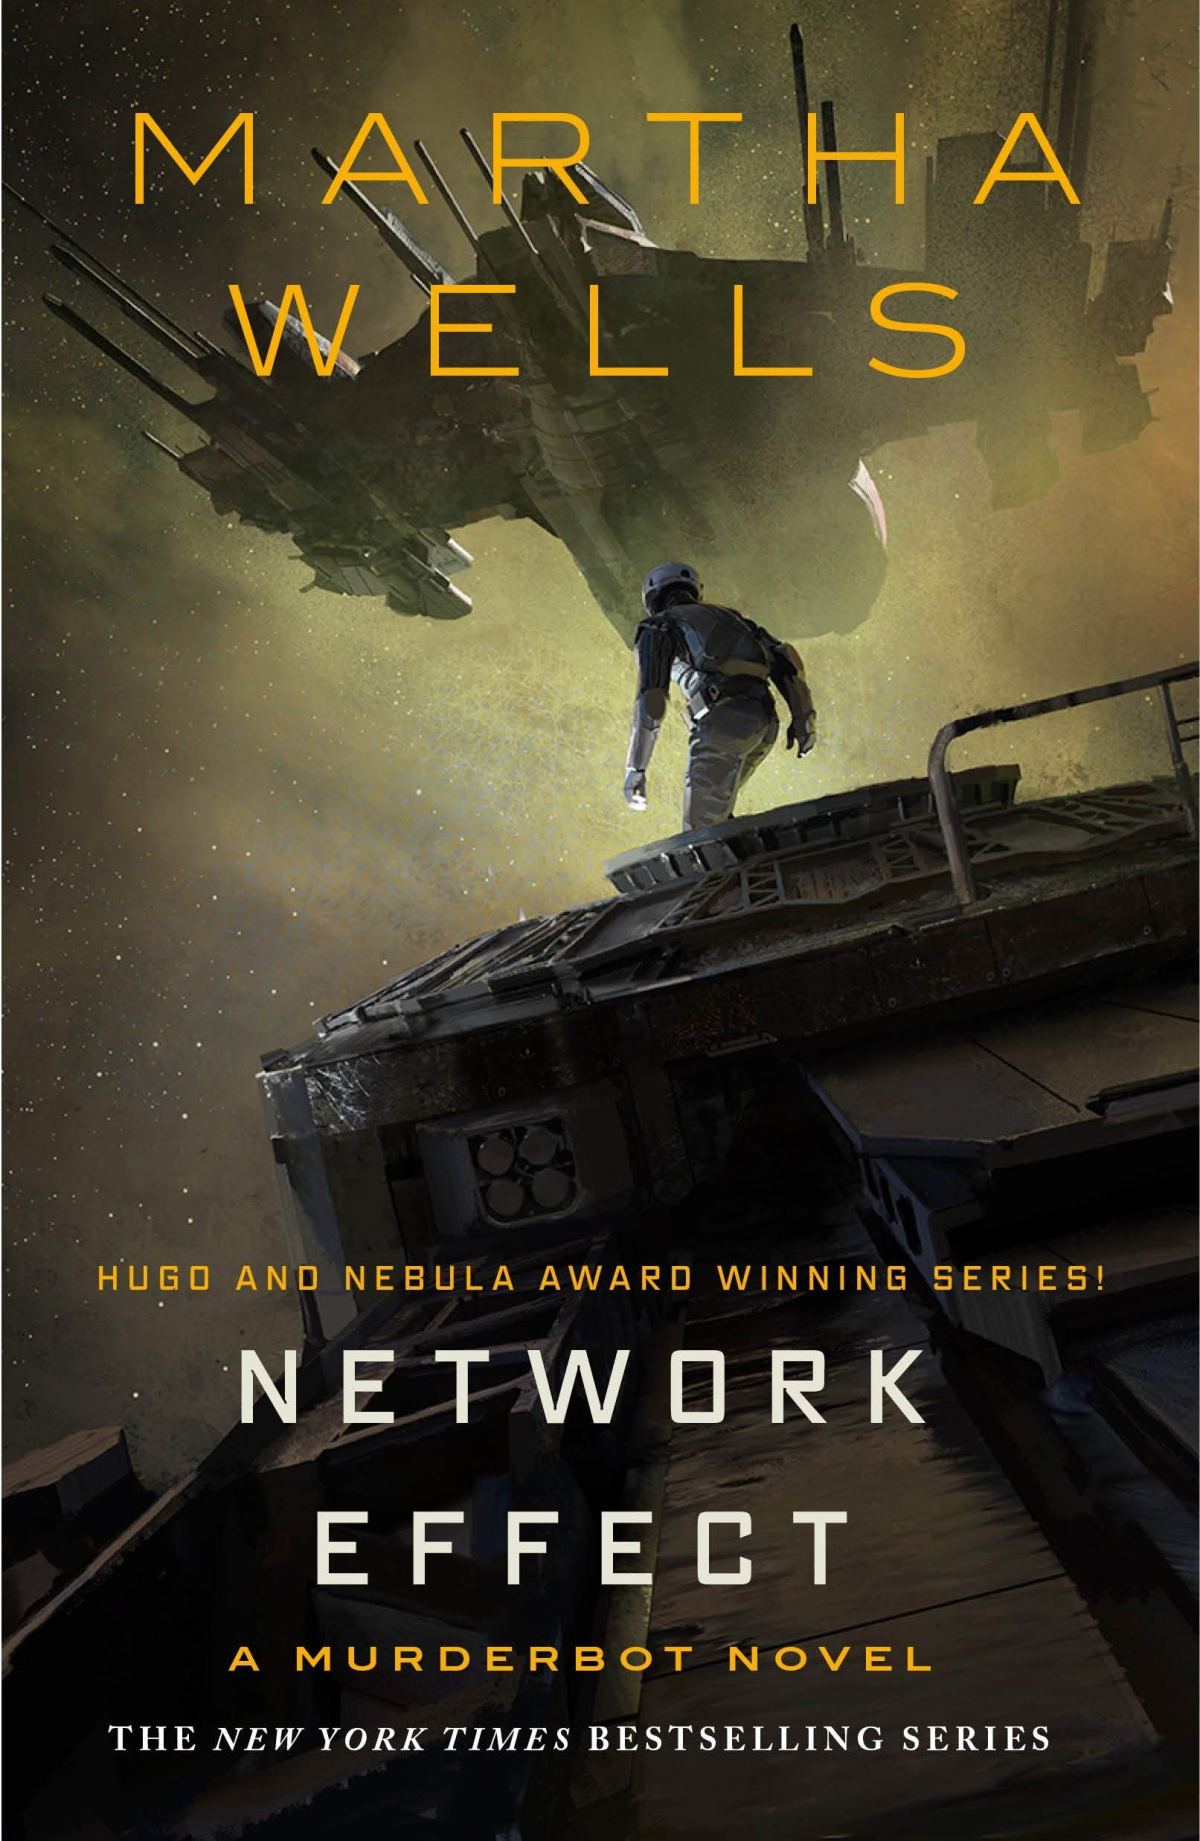 Book Review: Network Effect by Martha Wells